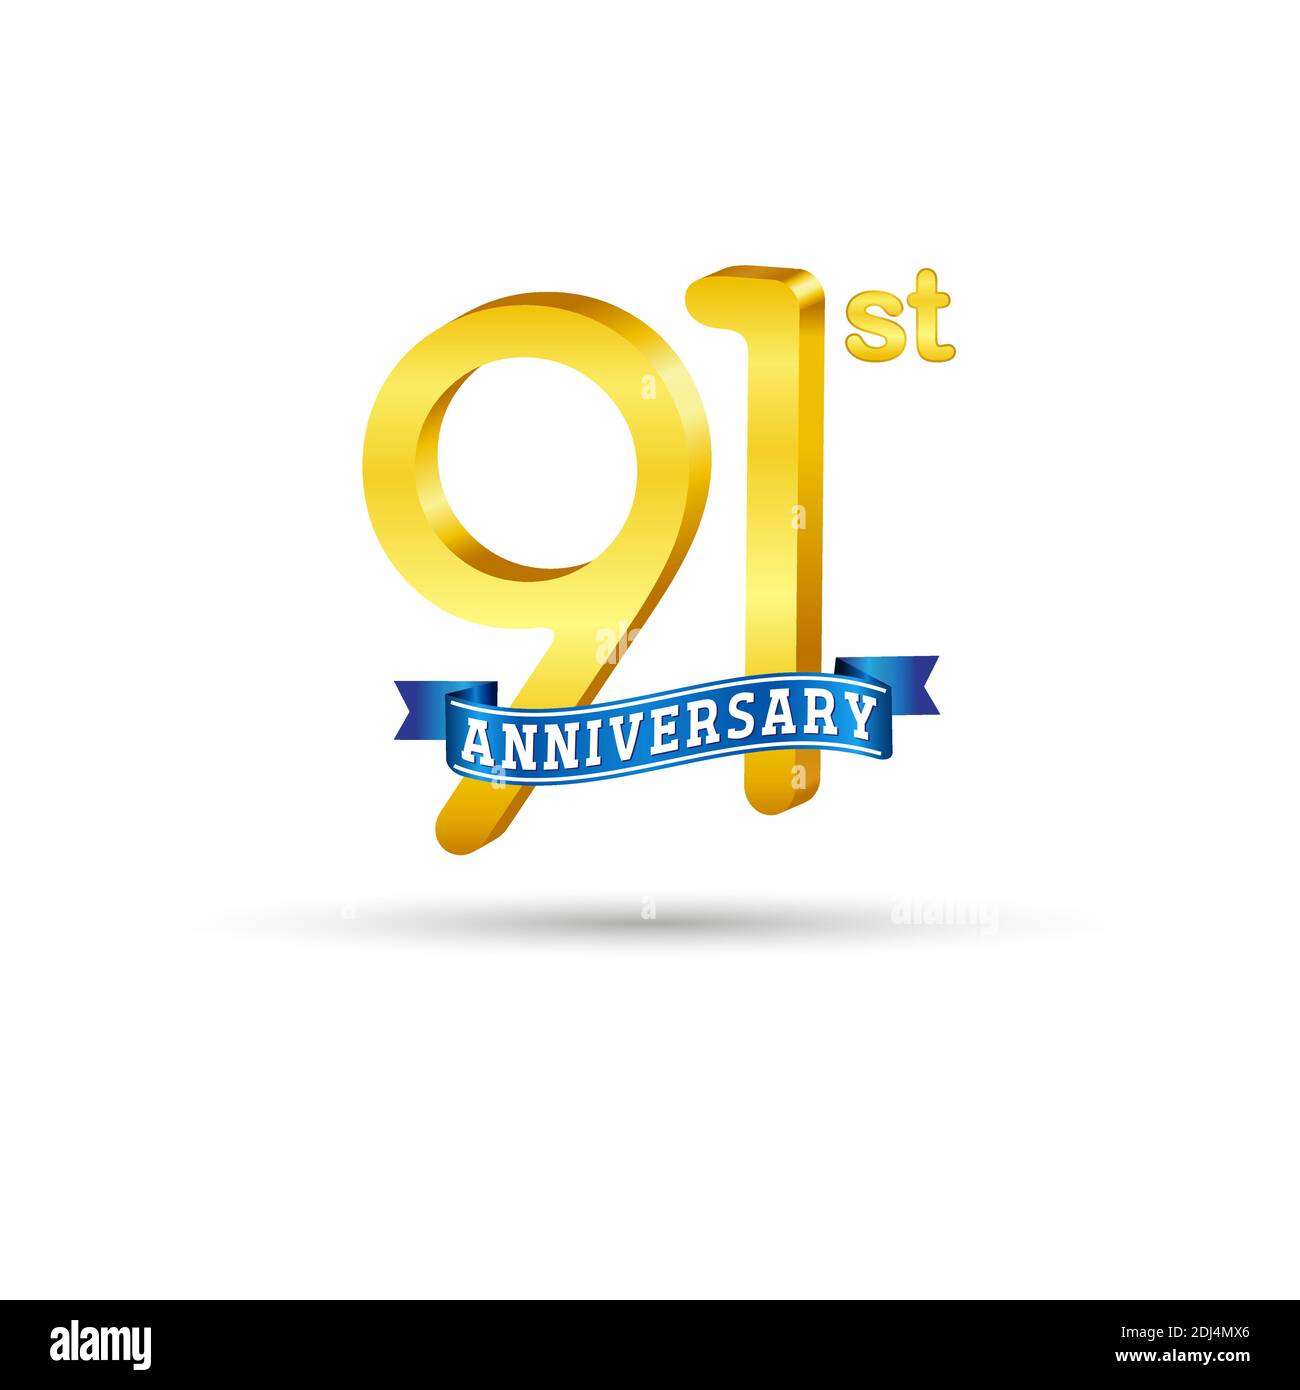 91st golden Anniversary logo with blue ribbon isolated on white background. 3d gold Anniversary logo Stock Vector